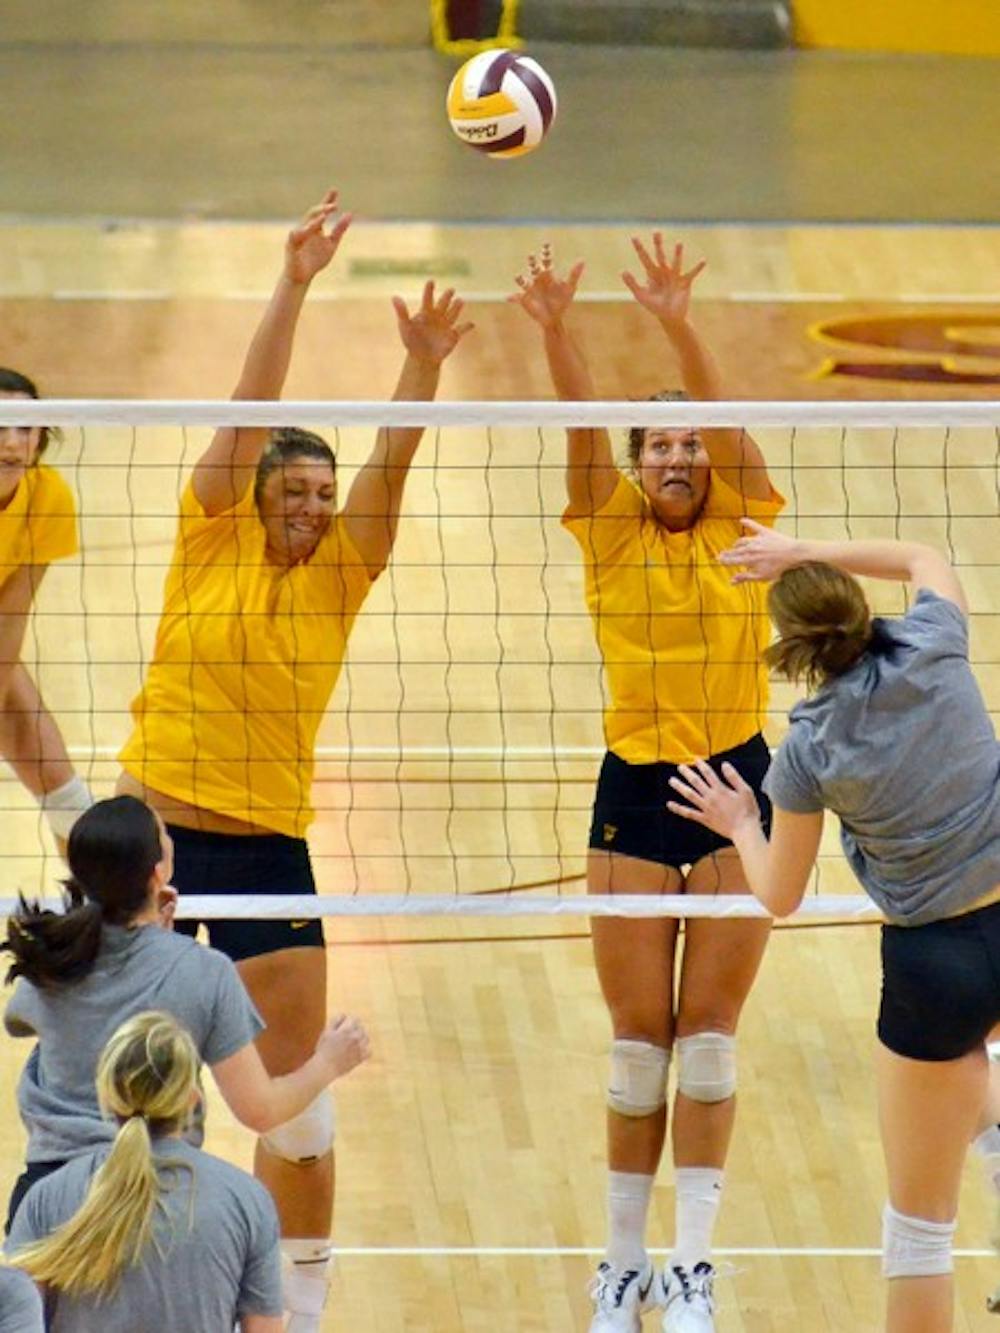 BUILDING BLOCKS: ASU senior middle blocker Sonja Markanovich and redshirt sophomore outside hitter Ashley Kastl raise up to block a shot in the Alumnae Match last August. The team centers on their unofficial motto, “One and Done,” to encourage themselves during games. (Photo by Aaron Lavinsky)